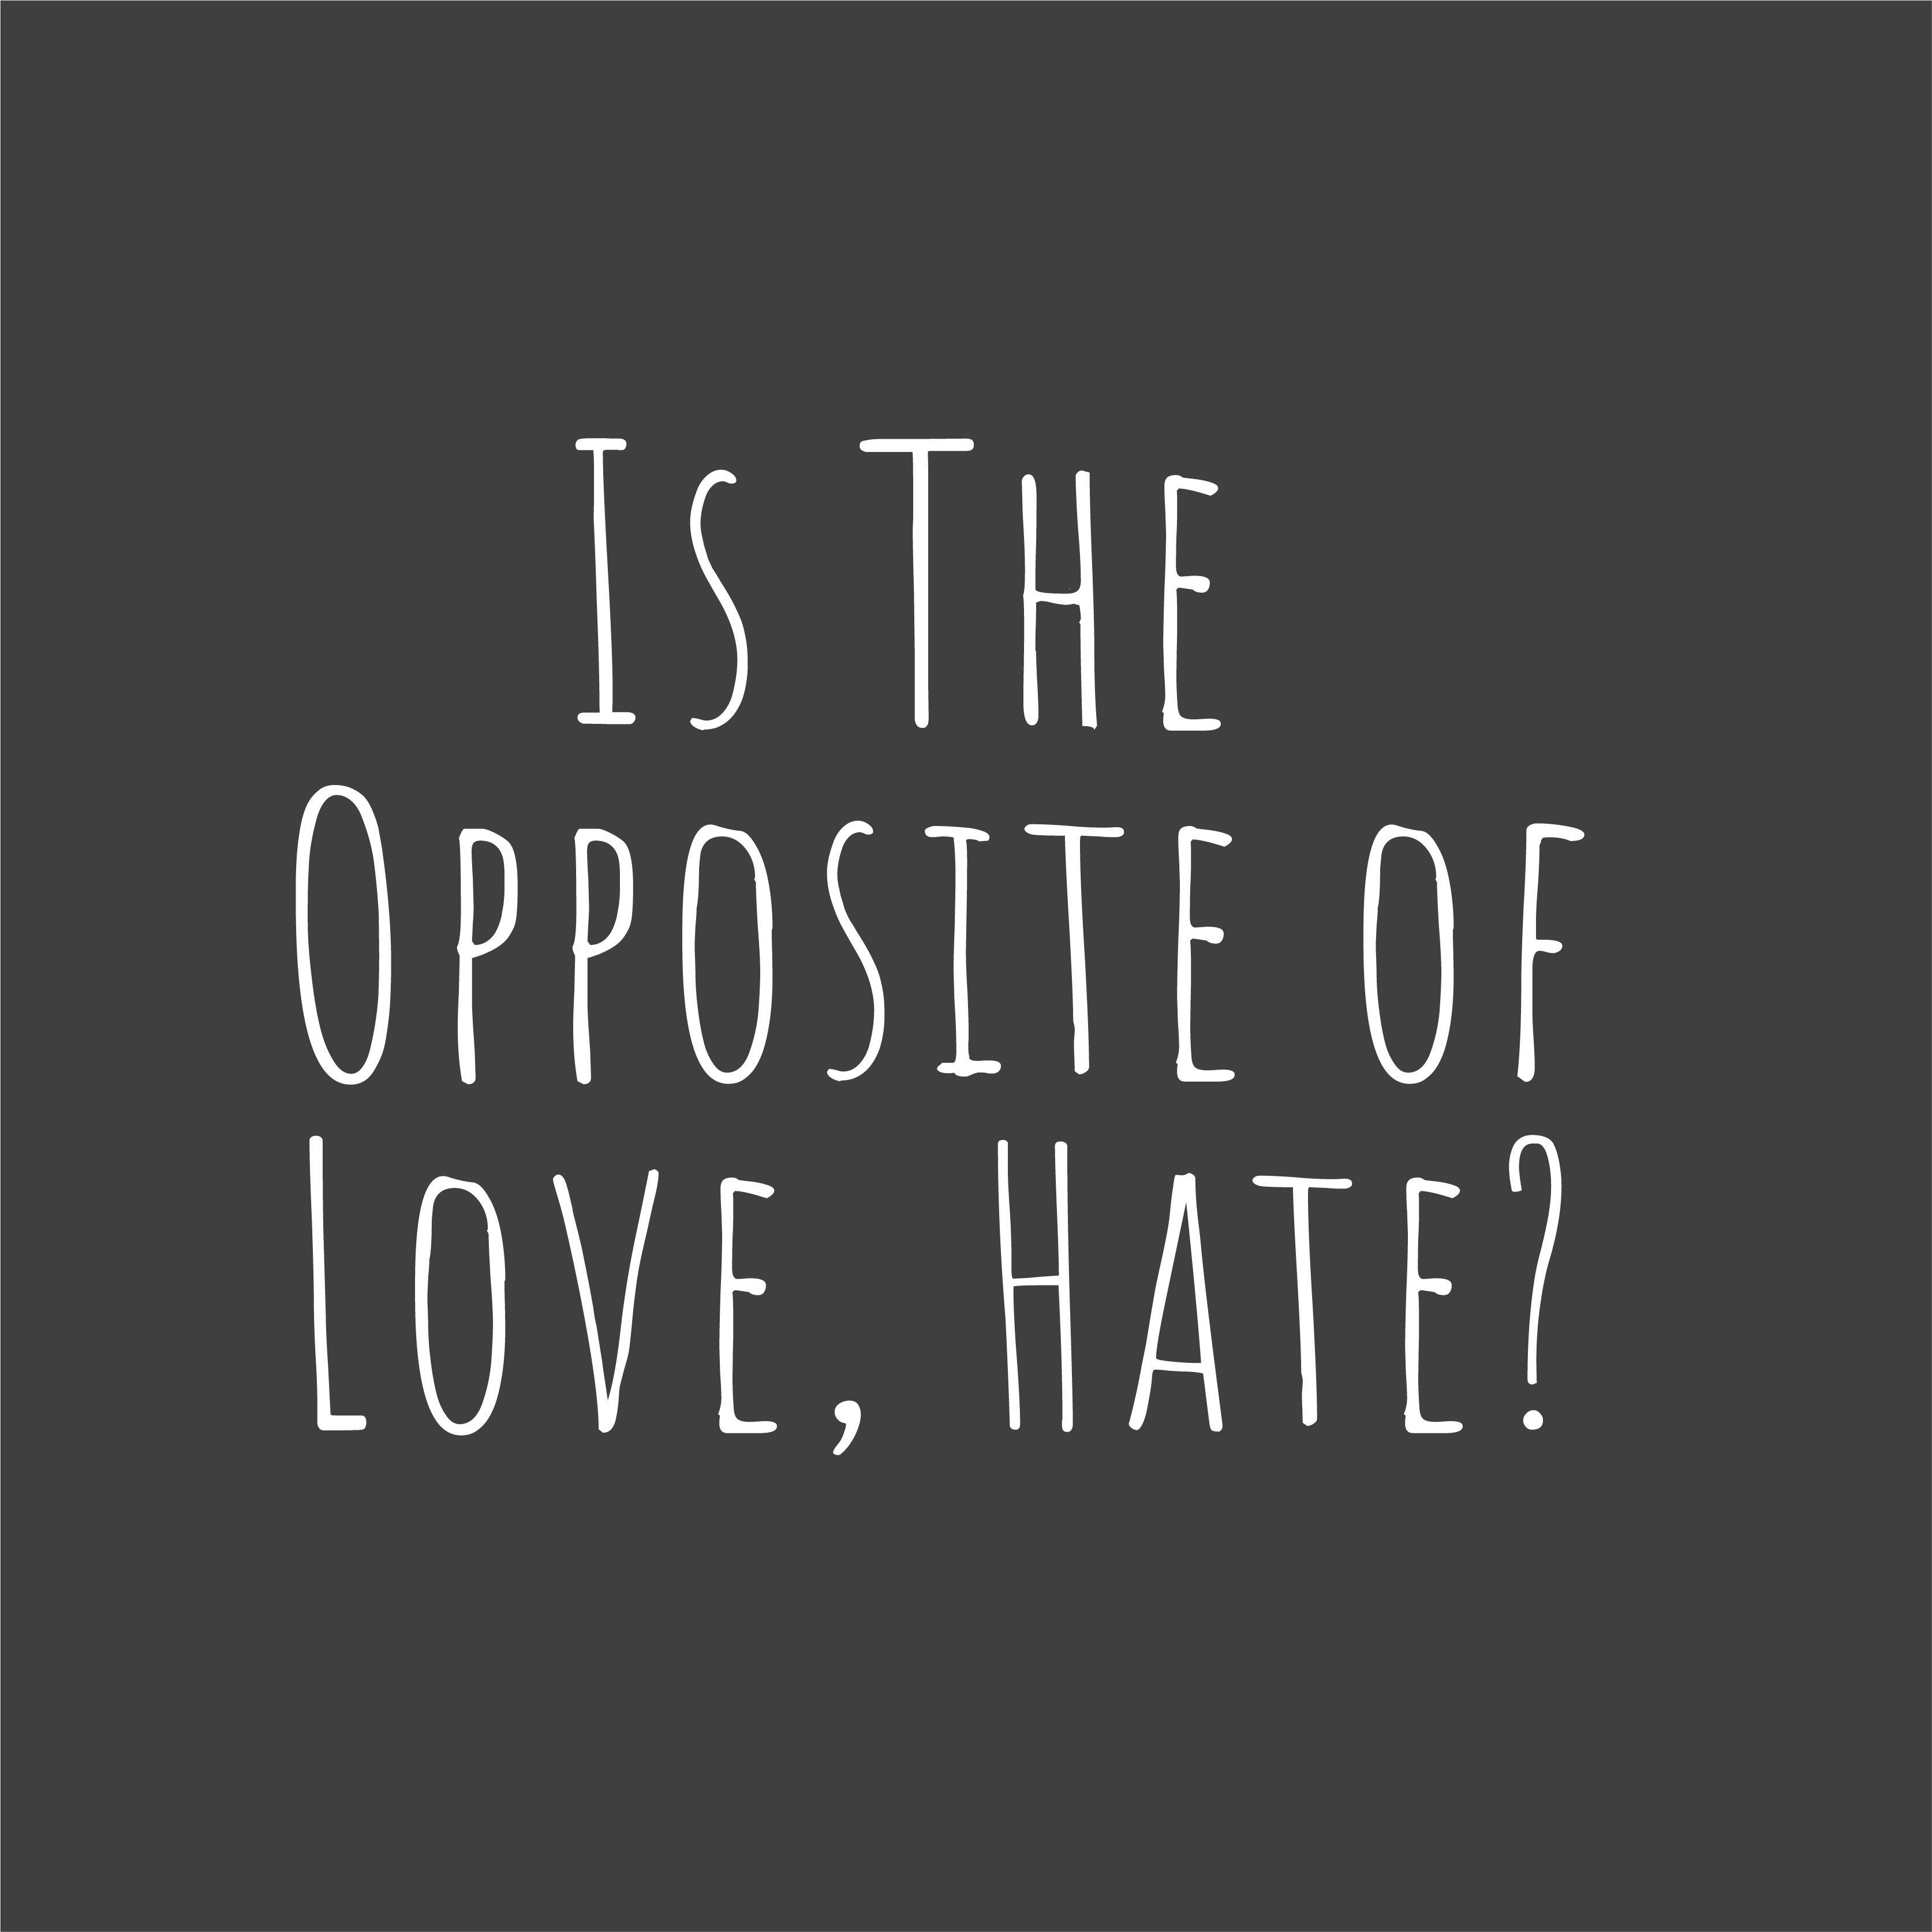 Is the opposite of love, hate?